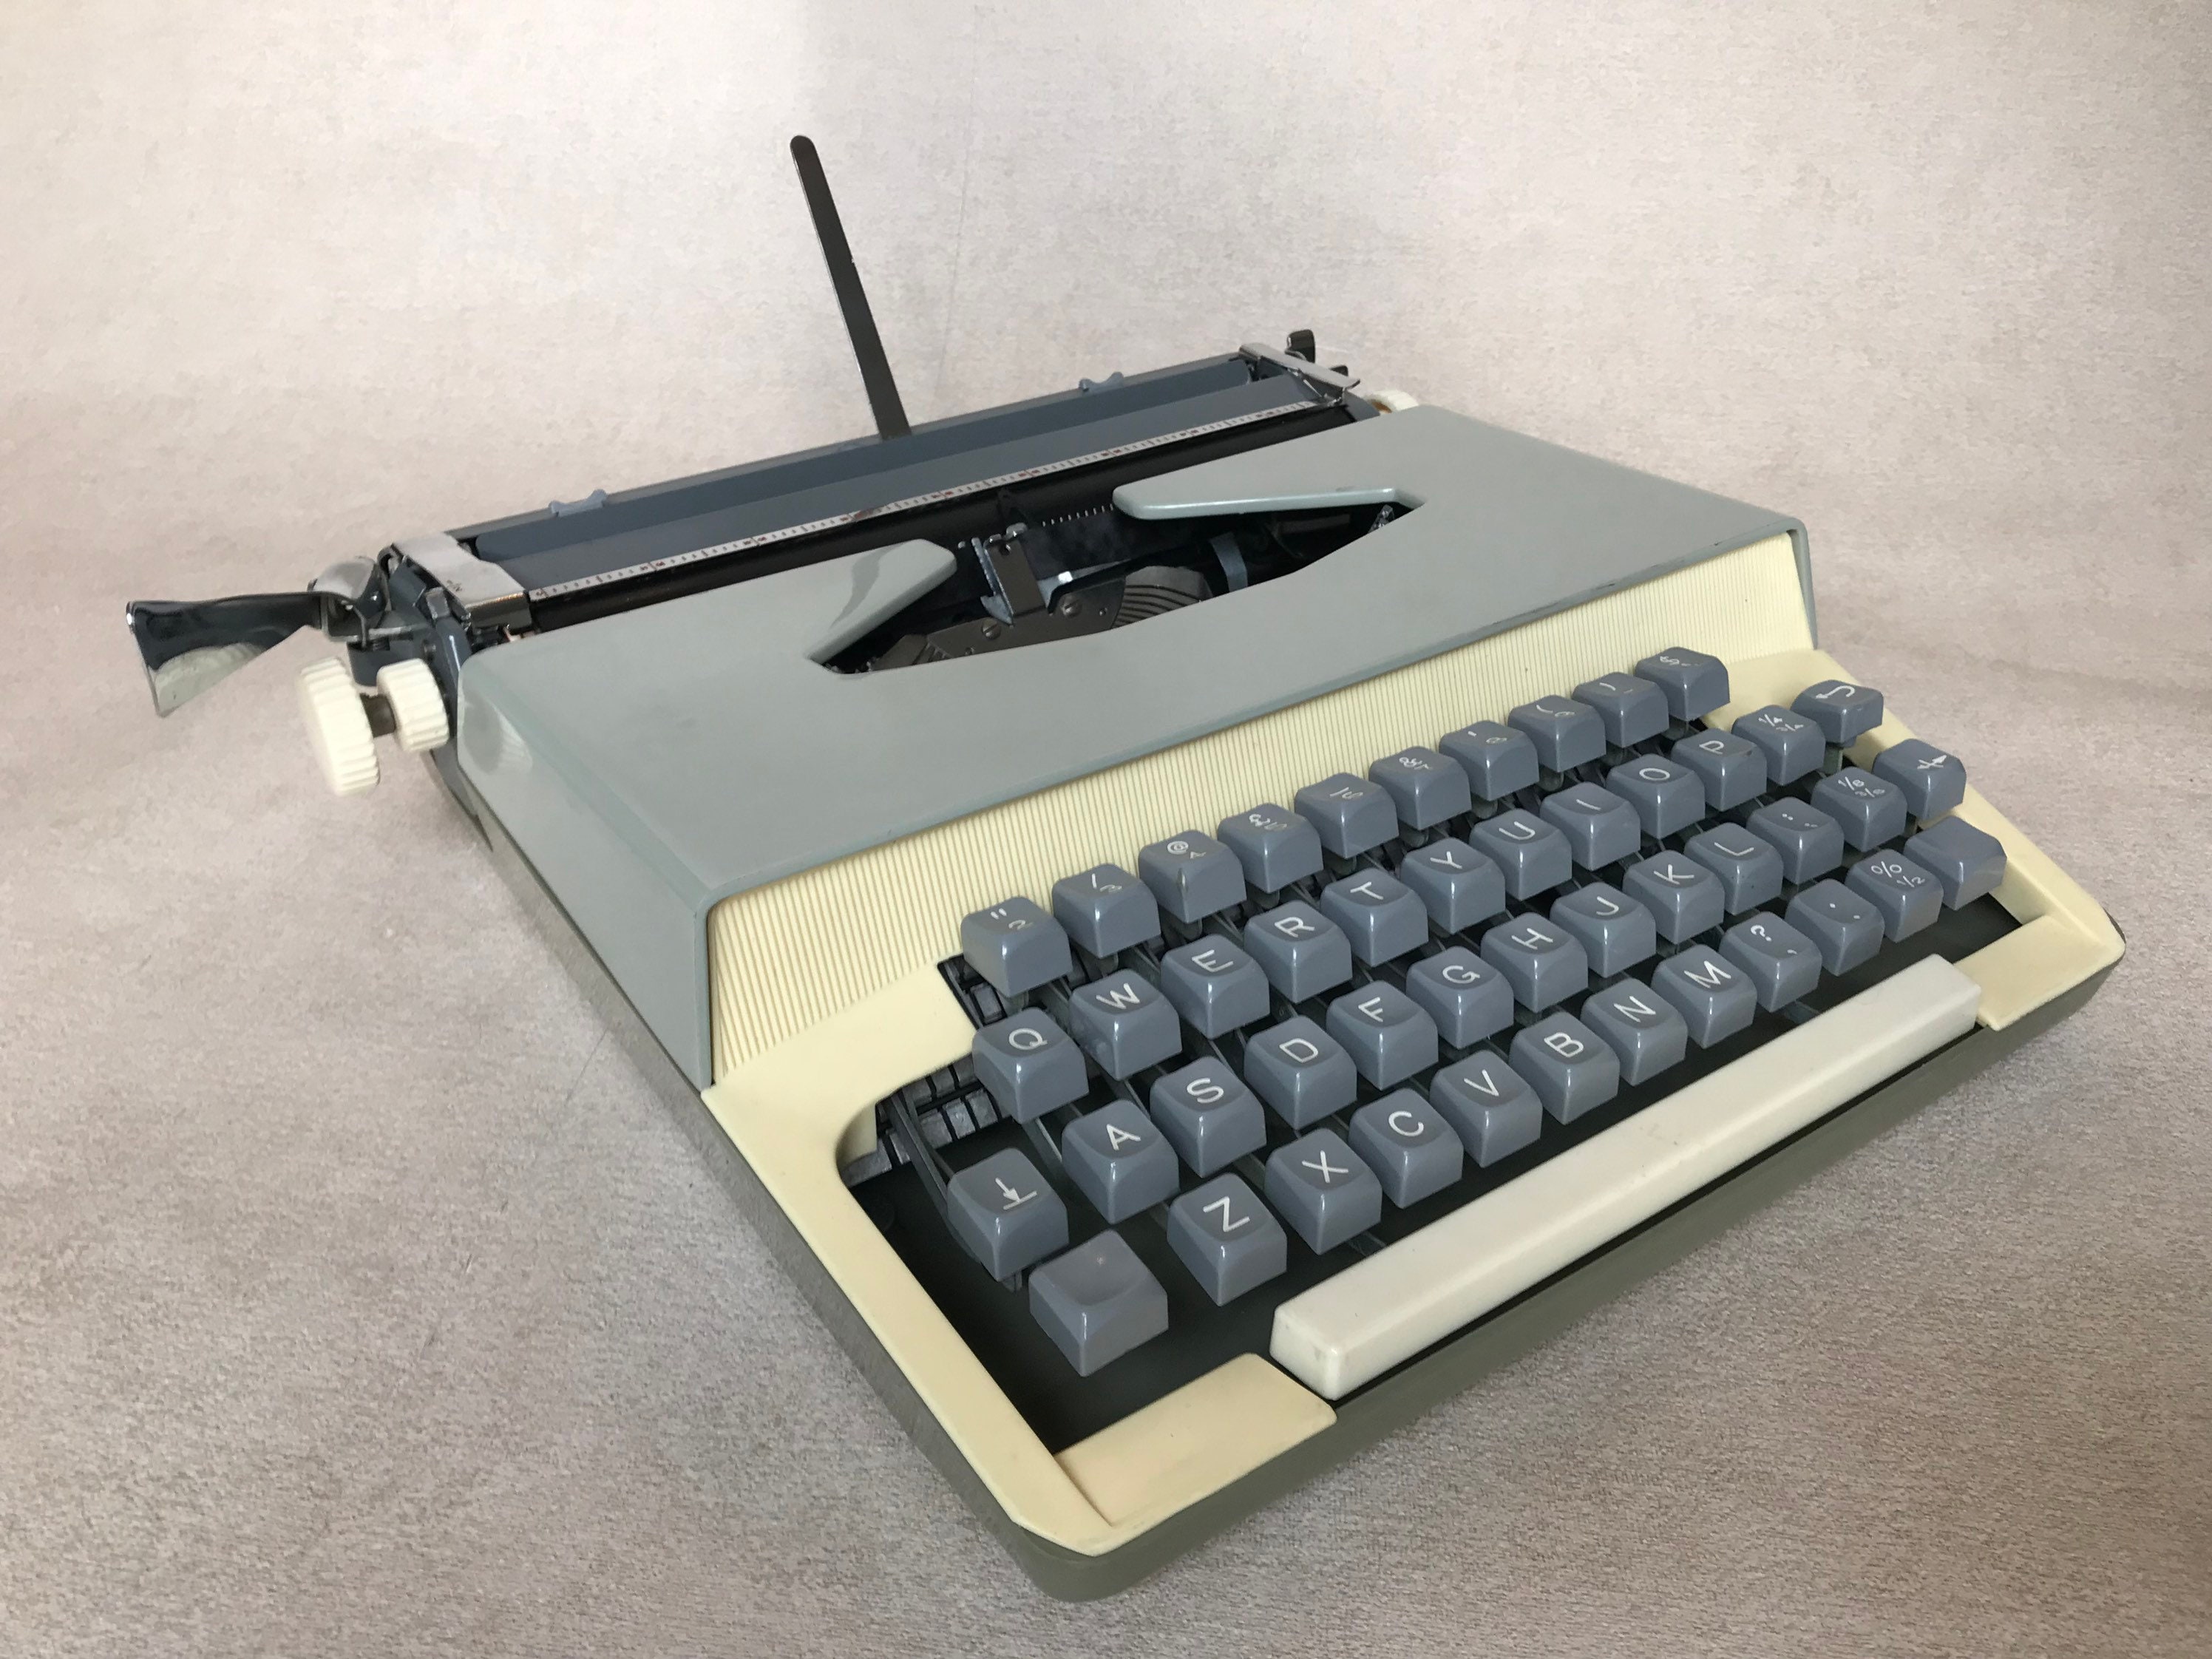 10 Unusual gifts for kids  Typewriter, Vintage typewriters, Fabric covered